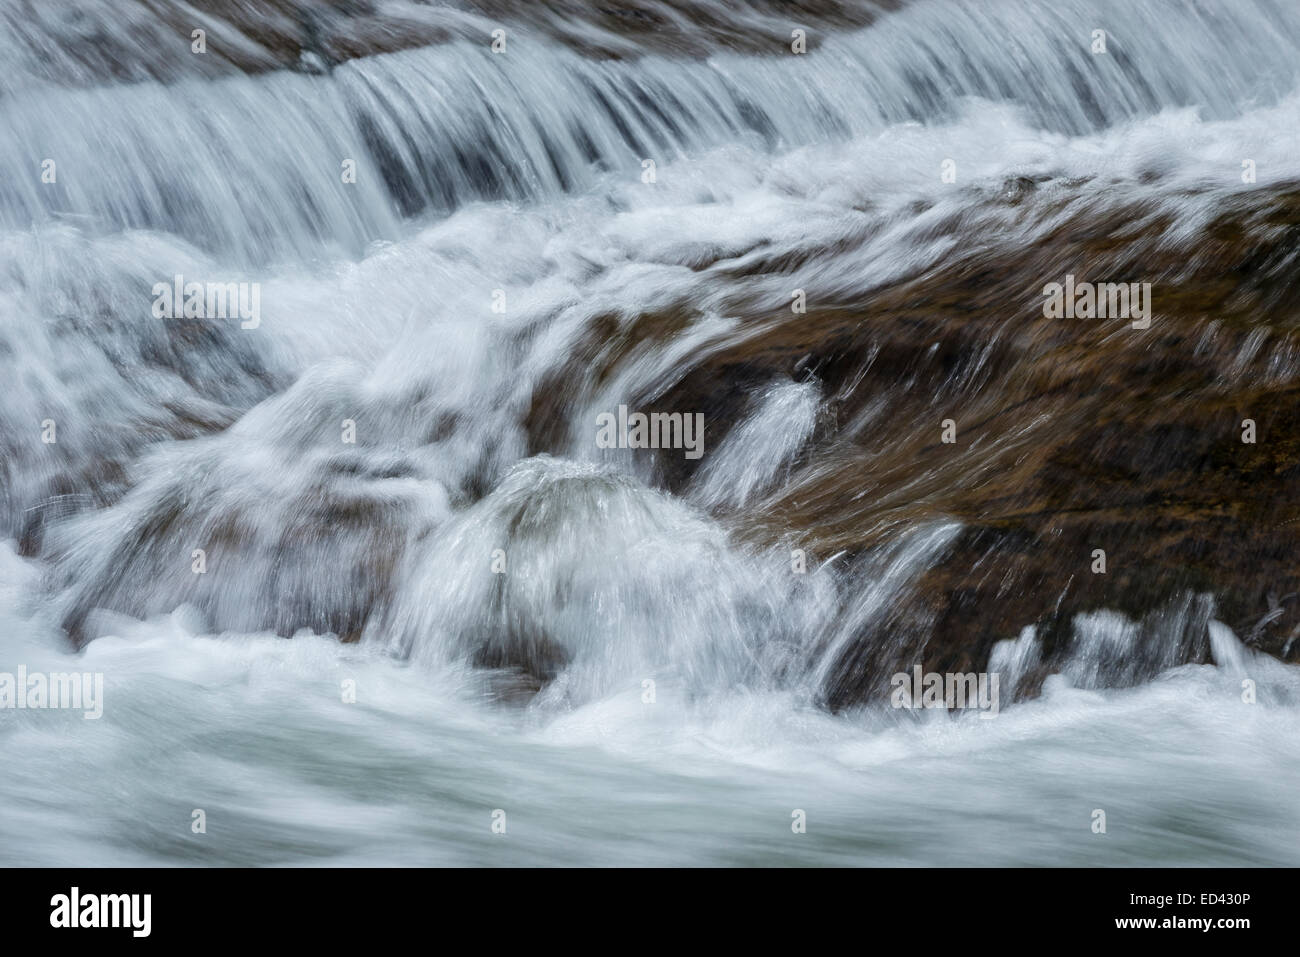 Cascate di dolci Creek, Siuslaw National Forest, Oregon. Foto Stock